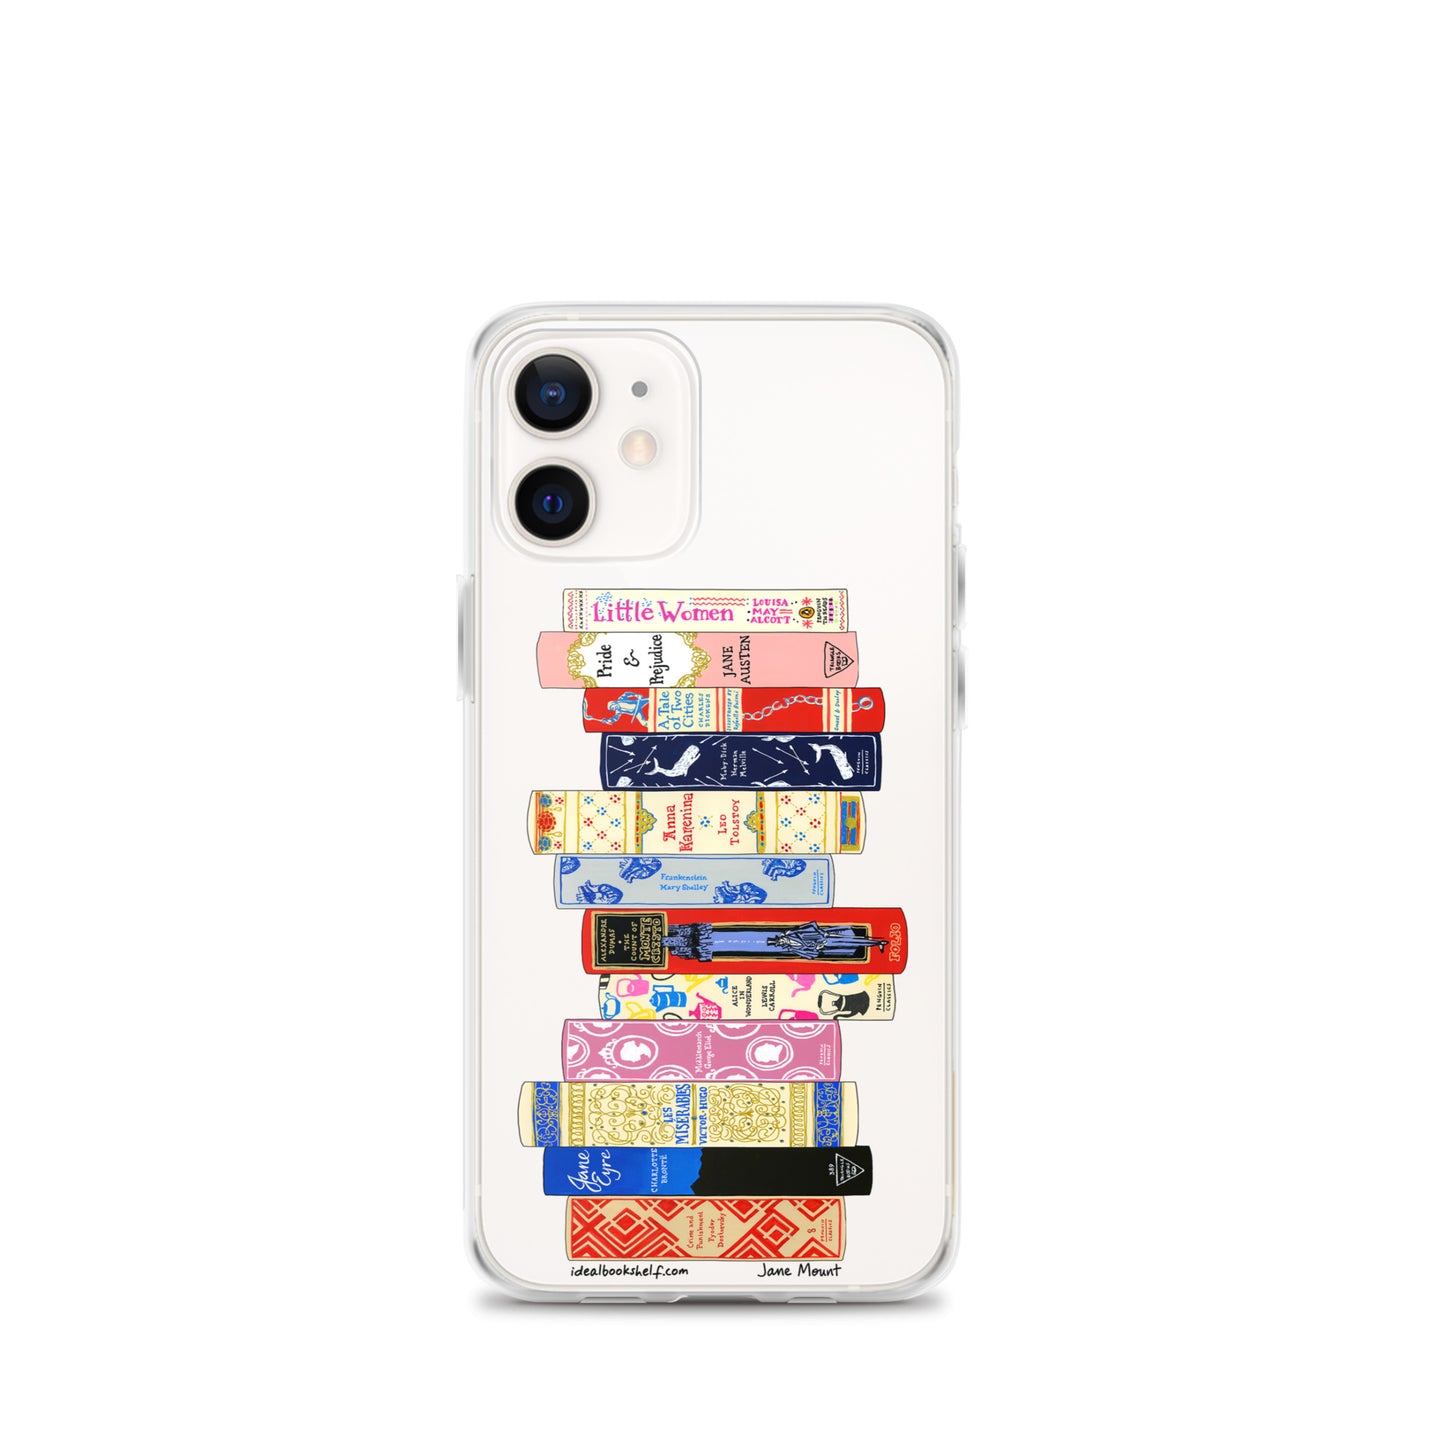 Novels of the 1800s - iPhone Case